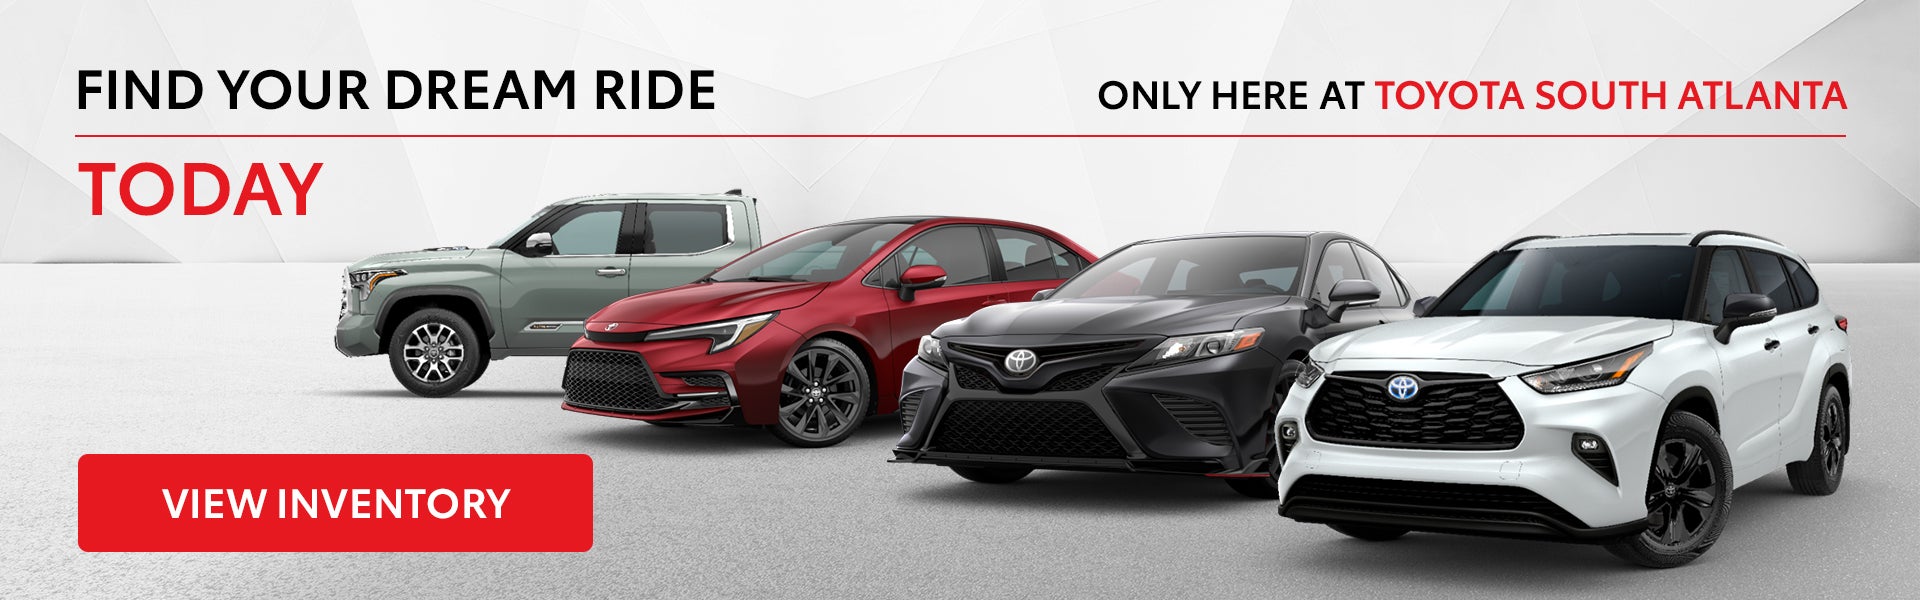 Find Your Dream Ride at Toyota South Atlanta